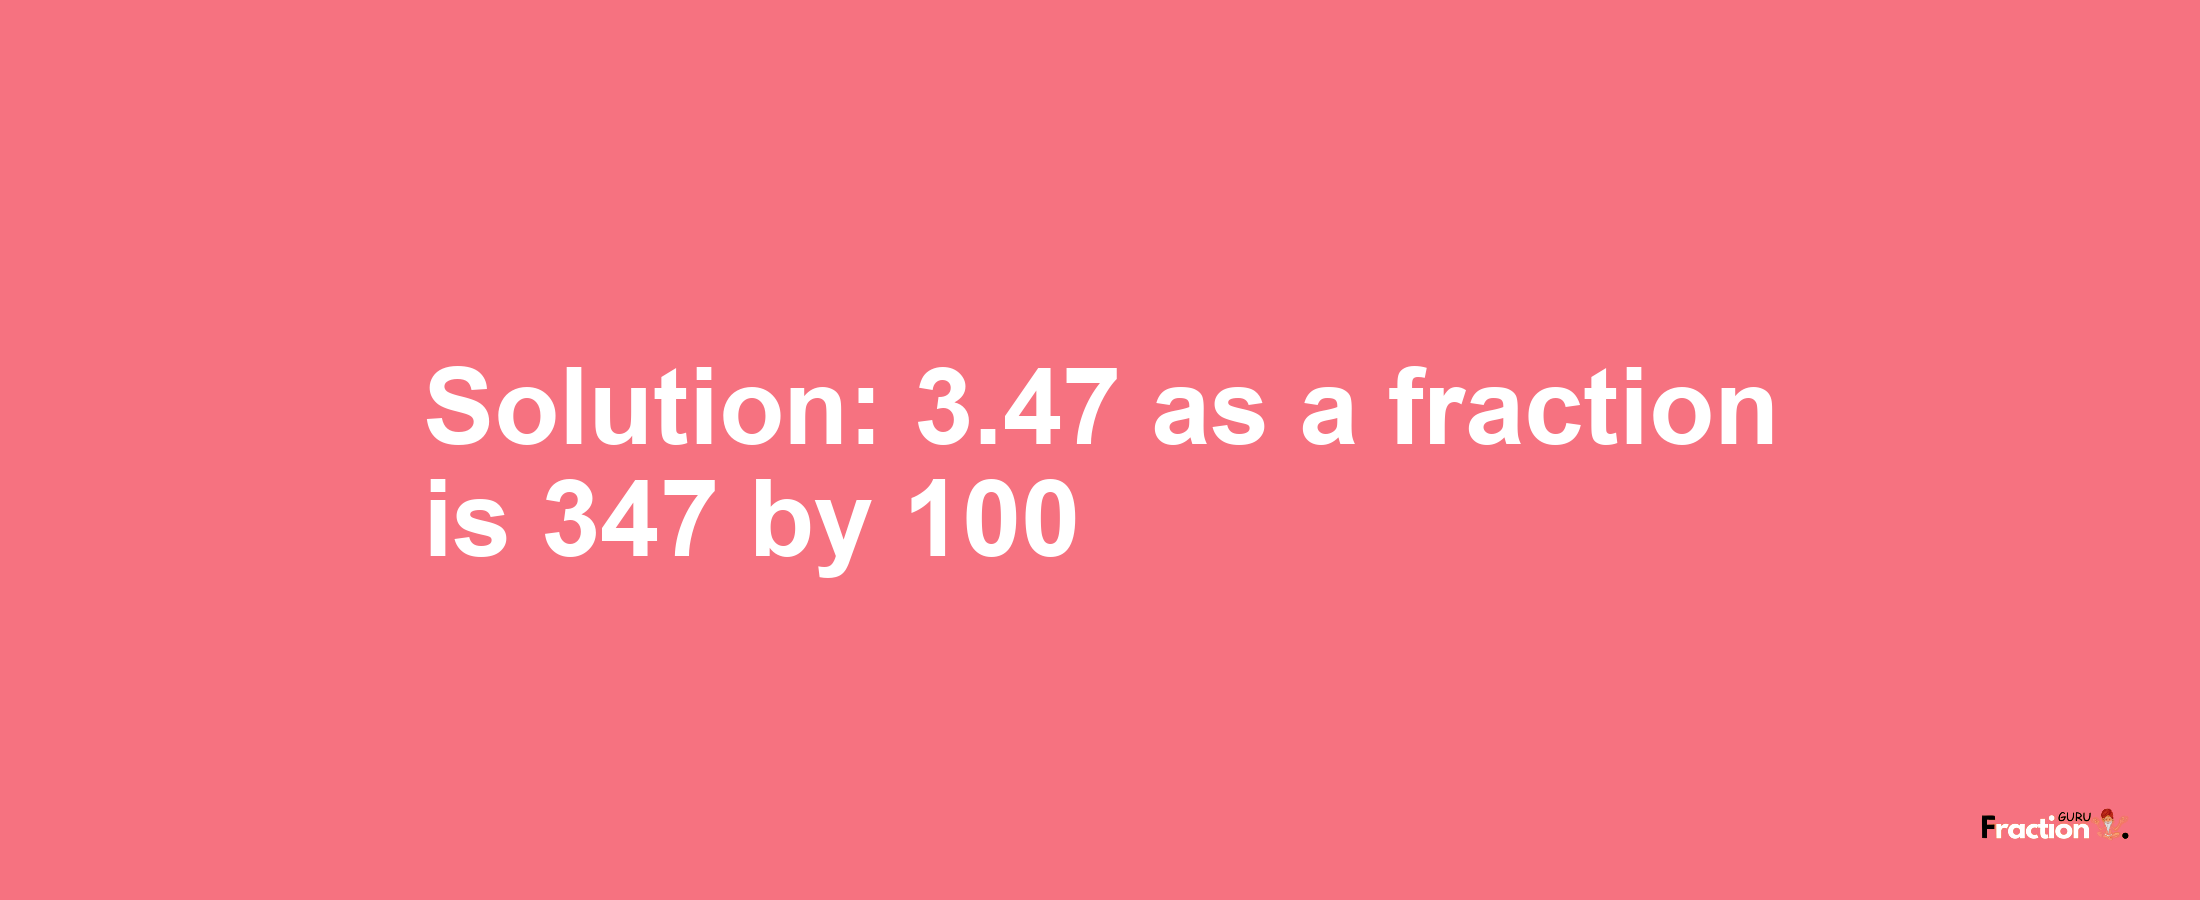 Solution:3.47 as a fraction is 347/100